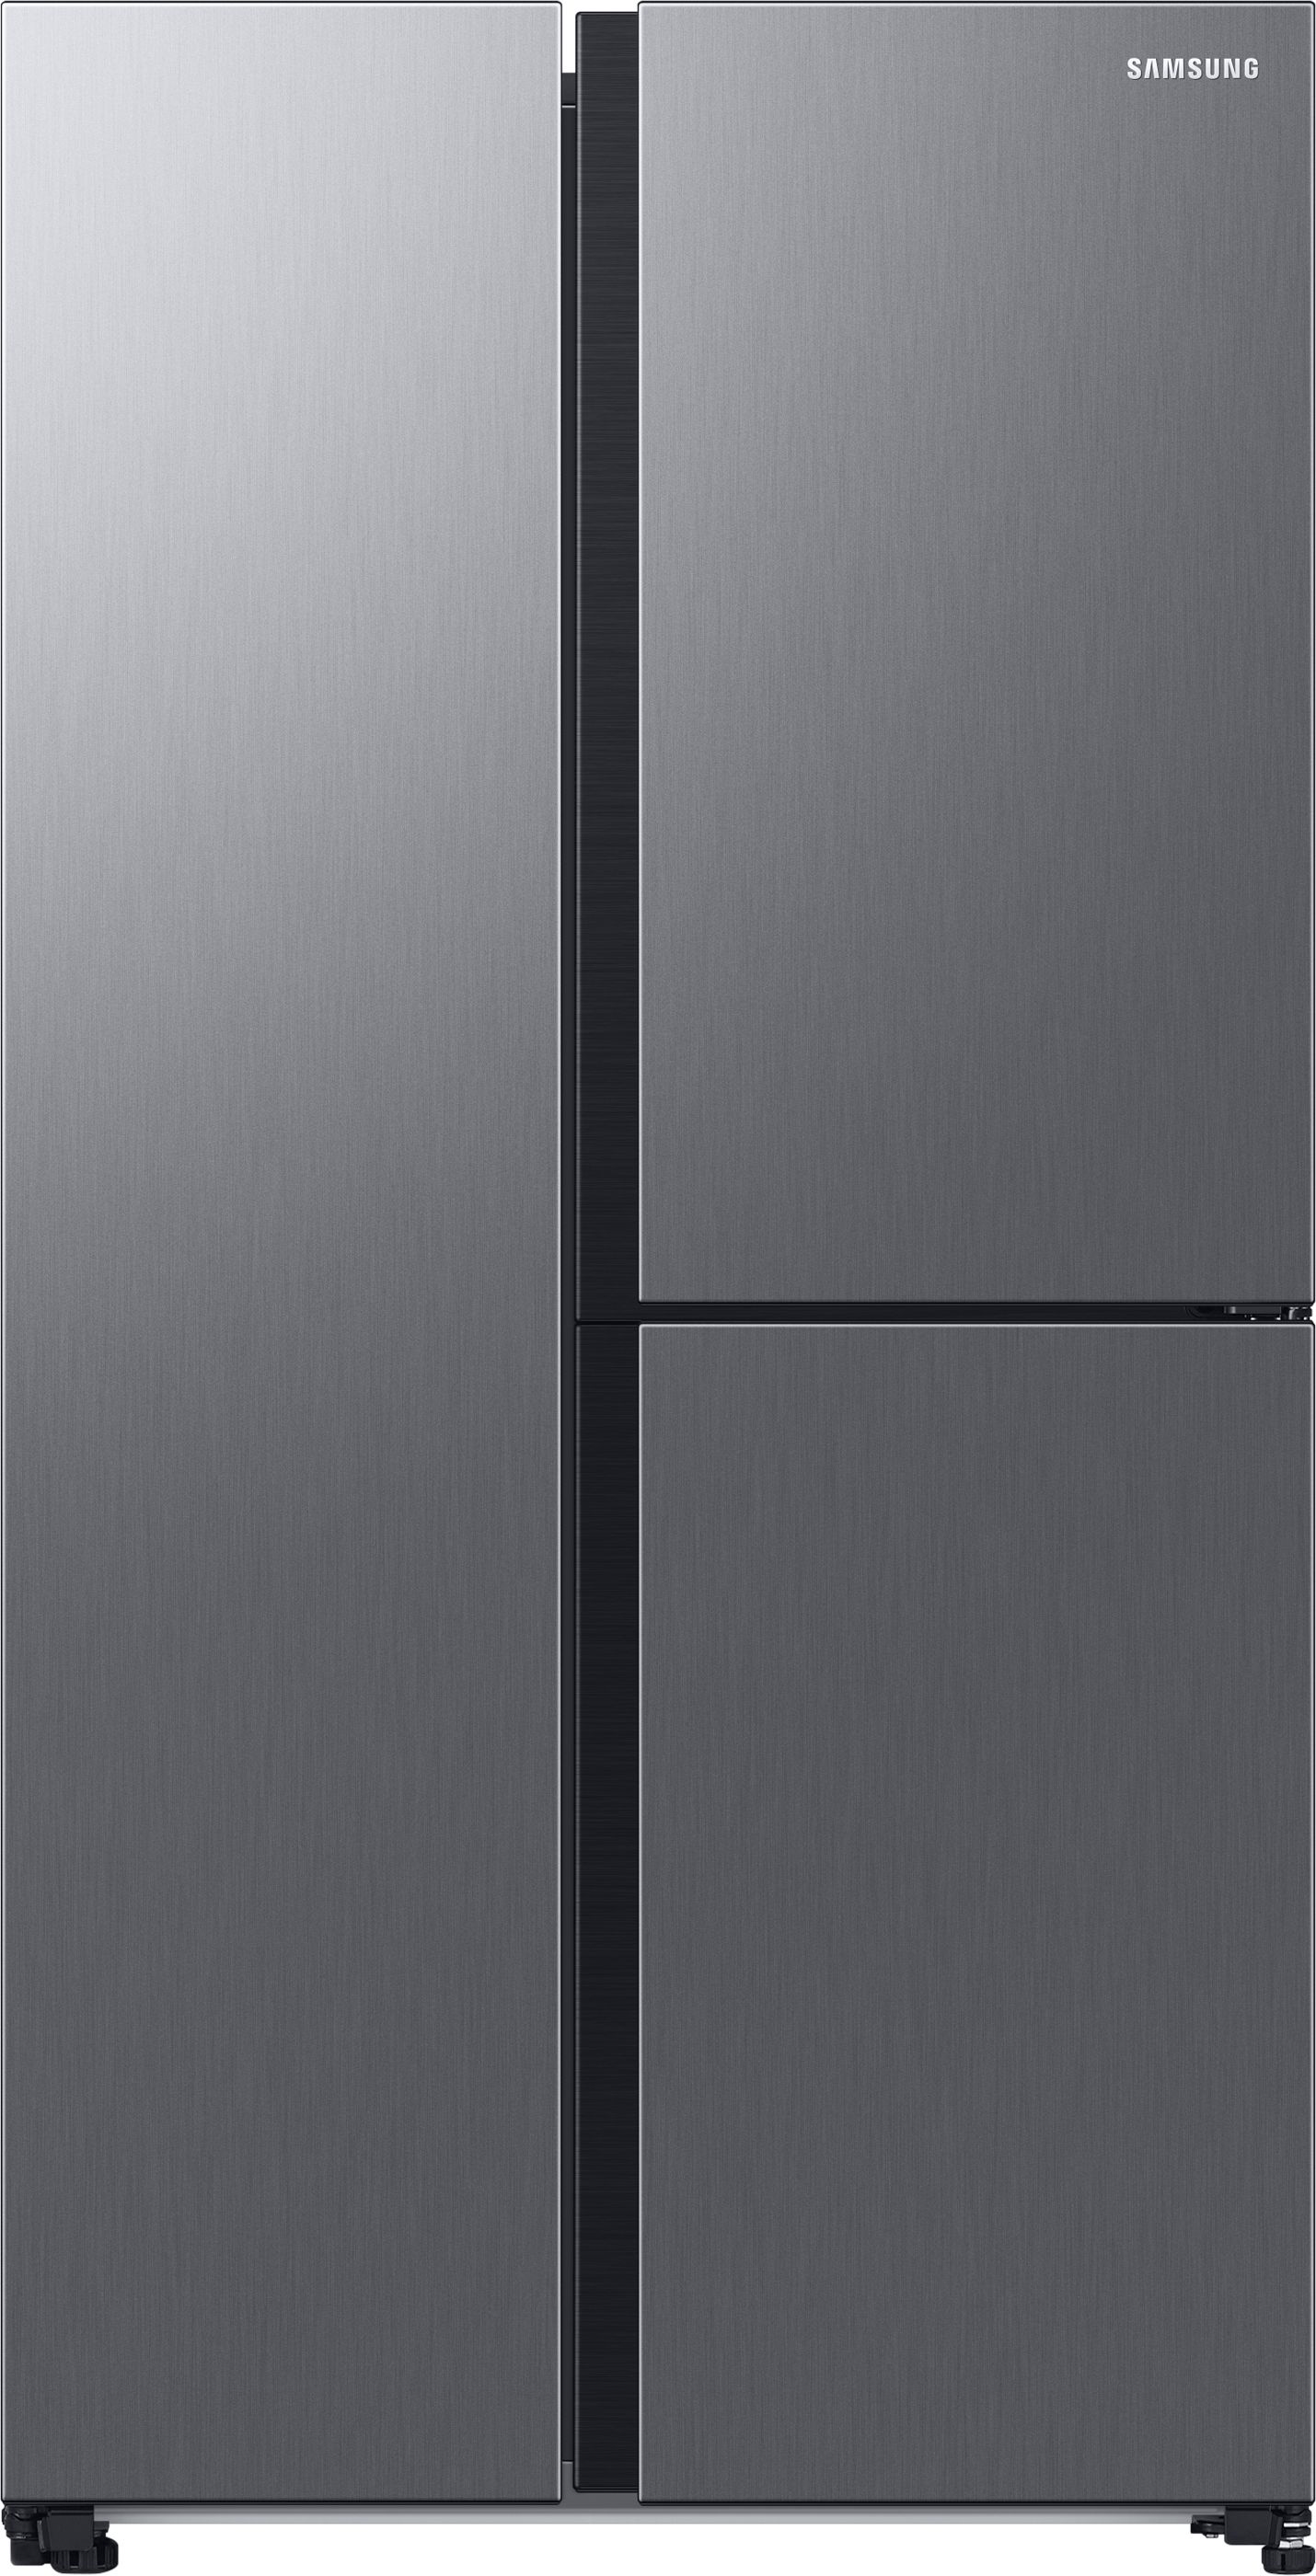 Samsung Series 9 Beverage Center RH69CG895DS9EU Wifi Connected Total No Frost American Fridge Freezer - Inox - D Rated, Stainless Steel